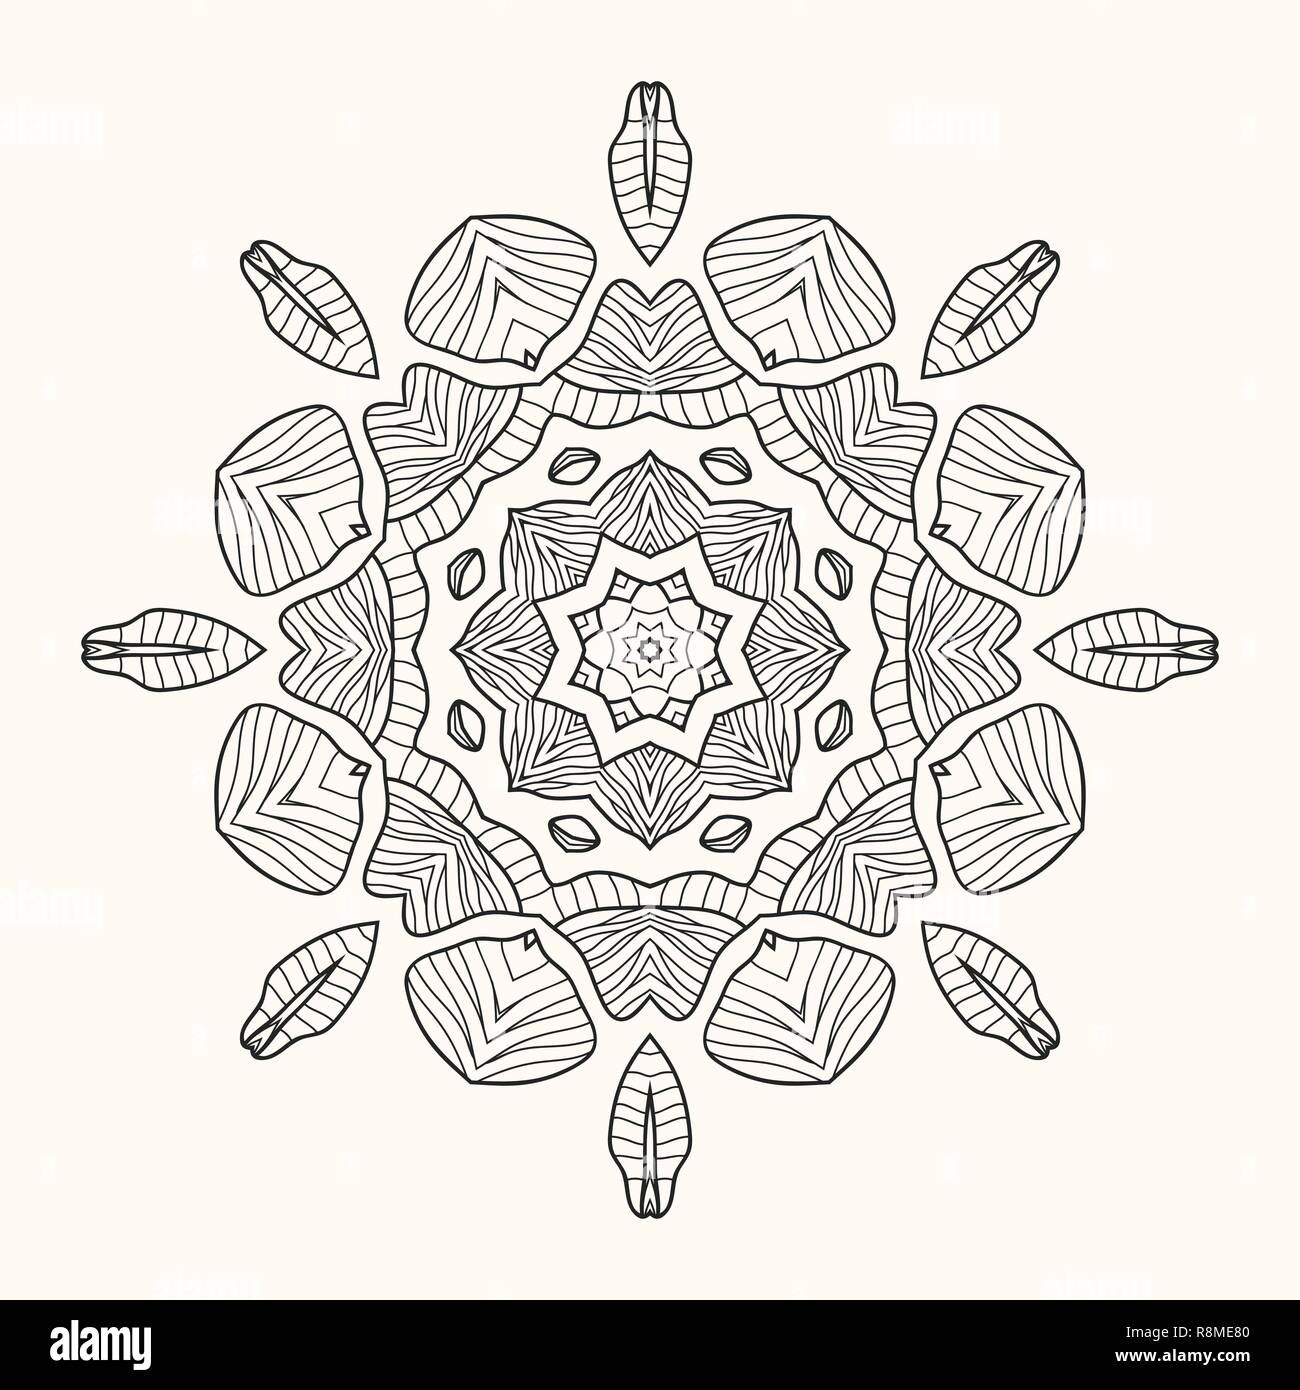 Decorative mandala. Vector illustration. Patterned design element. Round ornament. Symmetric abstract object isolated on light background. Ethnic deco Stock Vector